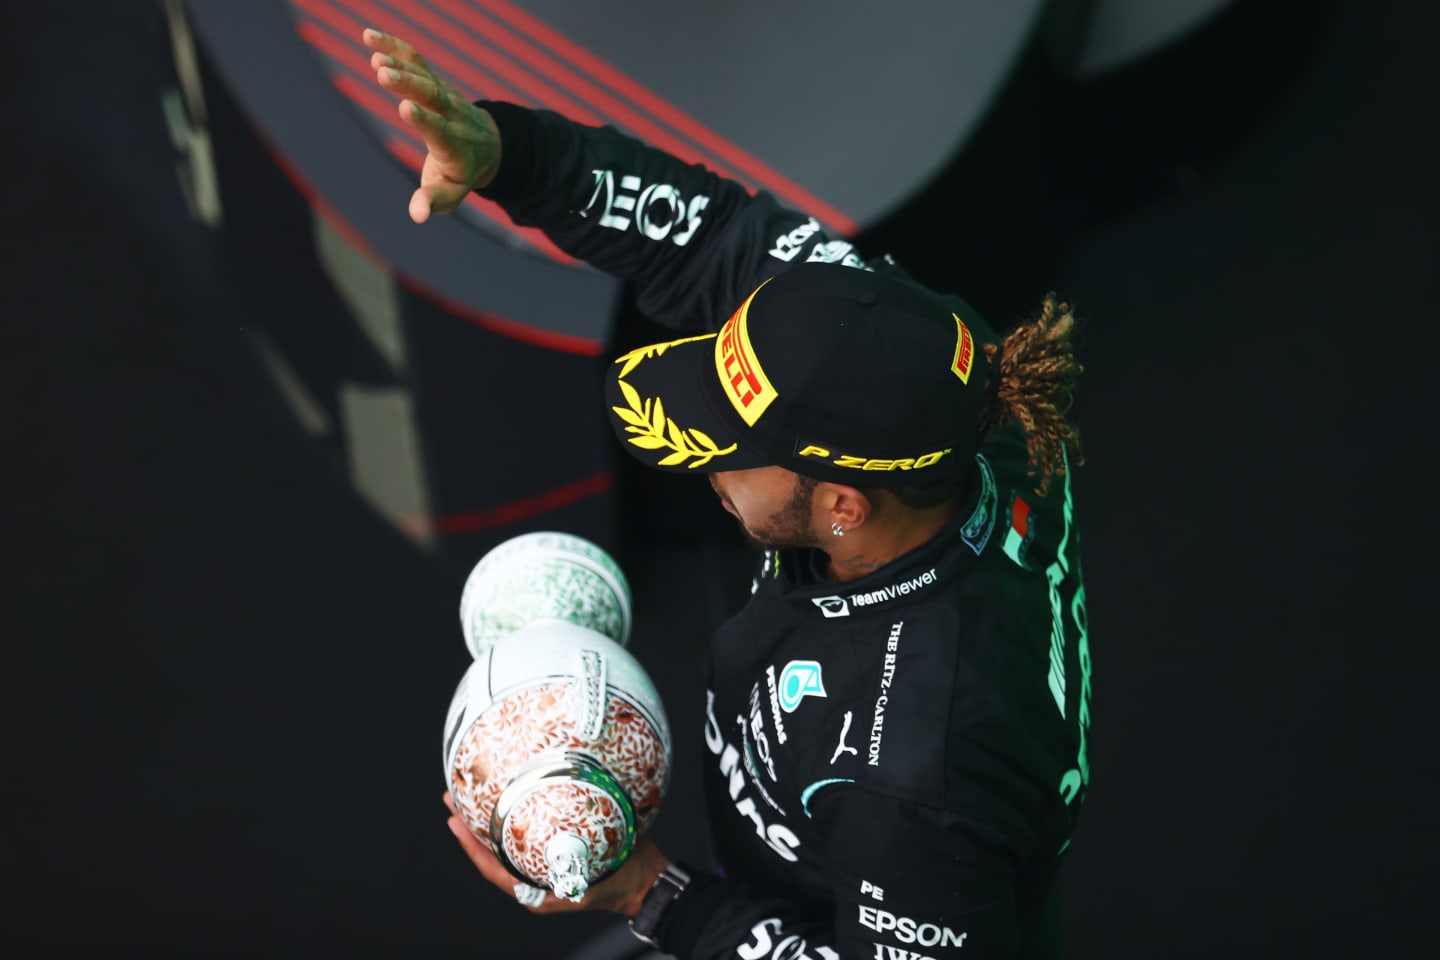 BUDAPEST, HUNGARY - AUGUST 01: Third placed Lewis Hamilton of Great Britain and Mercedes GP celebrates on the podium during the F1 Grand Prix of Hungary at Hungaroring on August 01, 2021 in Budapest, Hungary. (Photo by Bryn Lennon/Getty Images)